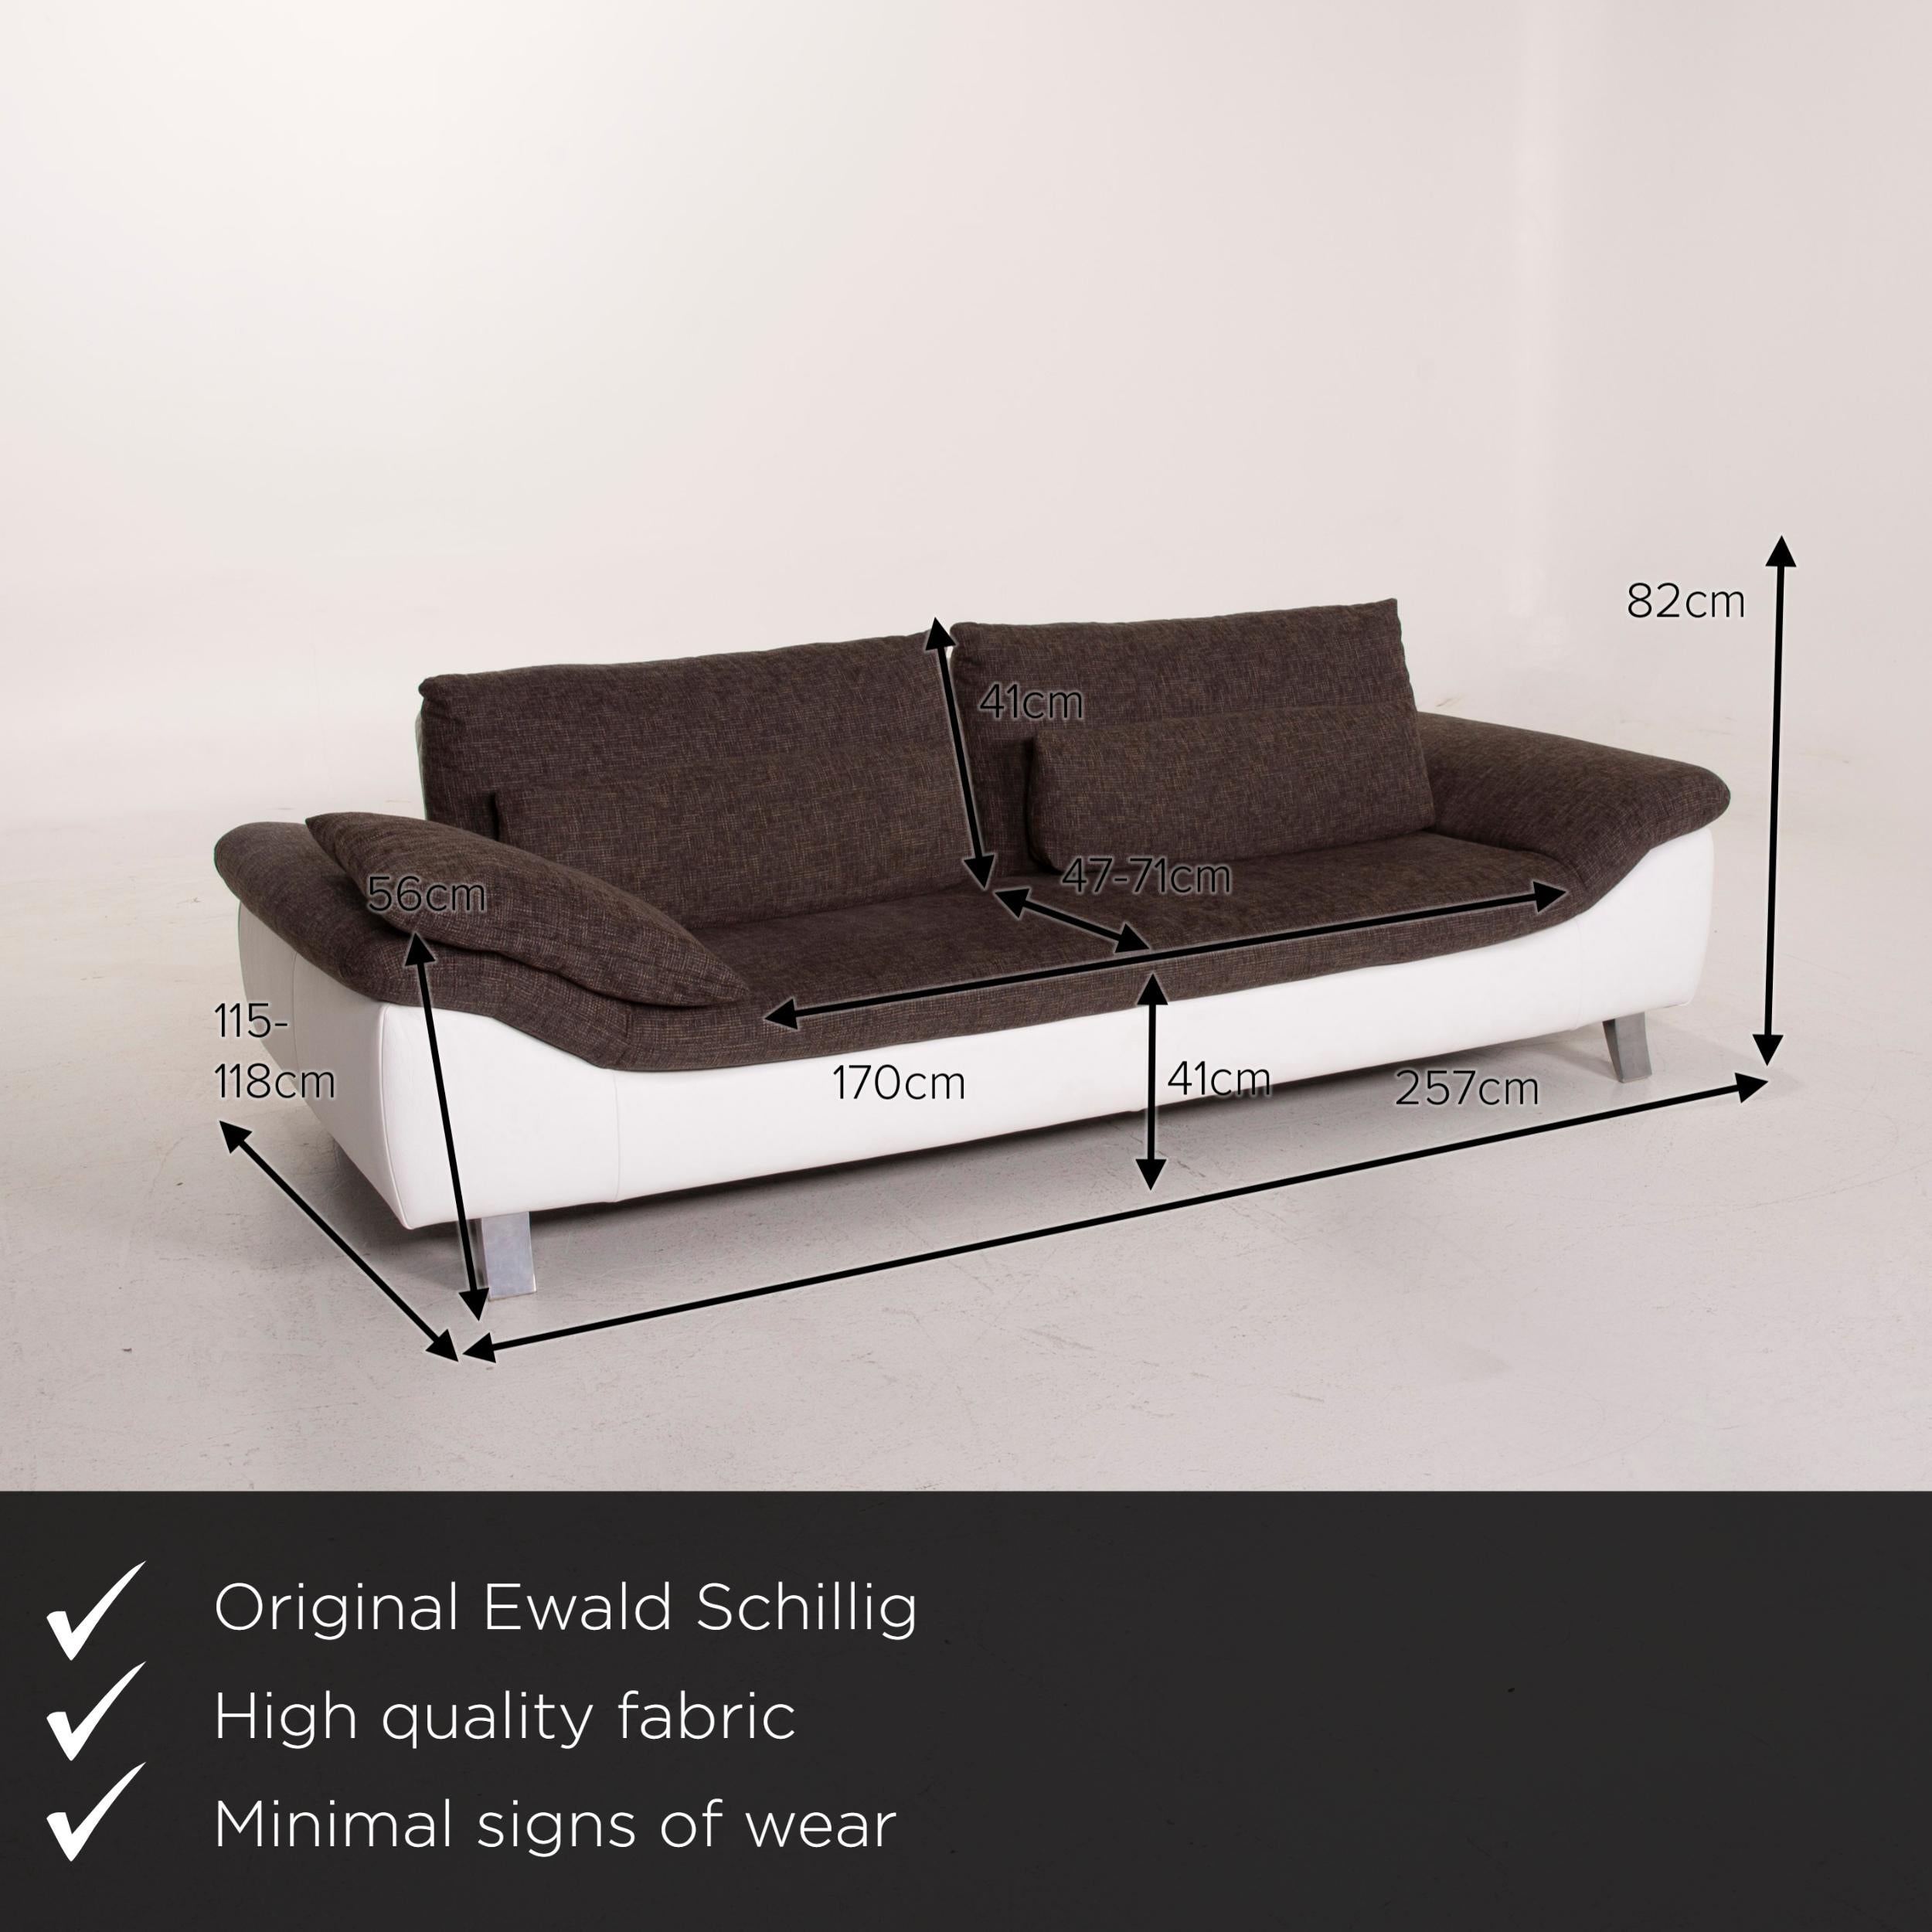 We present to you an Ewald Schillig Ameto fabric sofa set brown white leather three-seat stool.
   
 

 Product measurements in centimeters:
 

Depth 115
Width 257
Height 82
Seat height 41
Rest height 56
Seat depth 47
Seat width